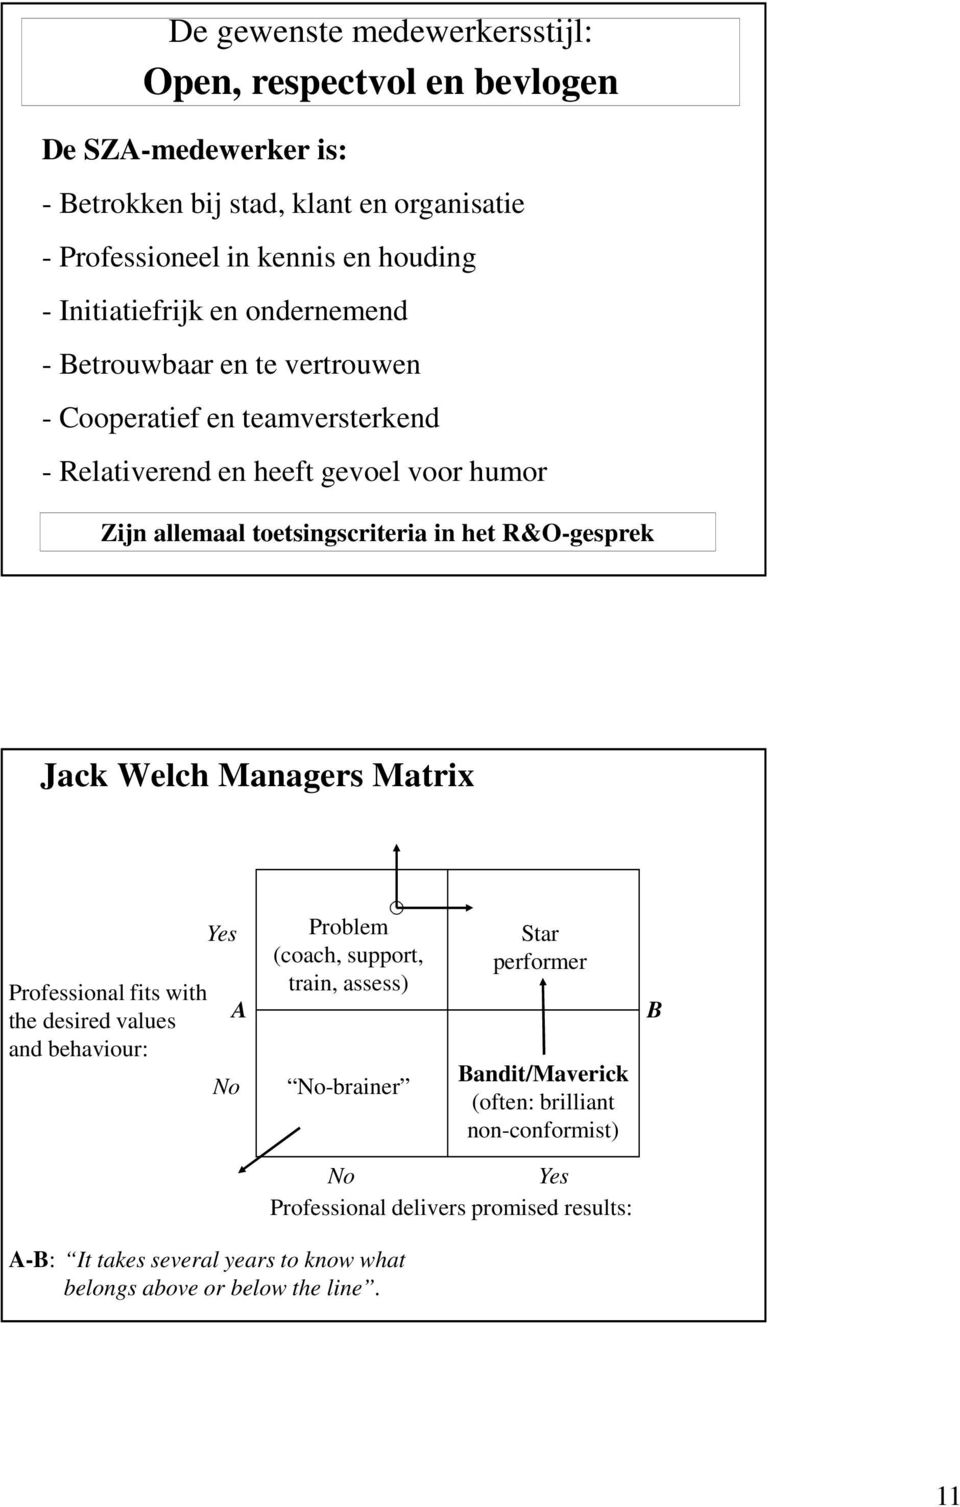 het R&O-gesprek Jack Welch Managers Matrix Professional fits with the desired values and behaviour: Yes A No Problem (coach, support, train, assess) No-brainer Star